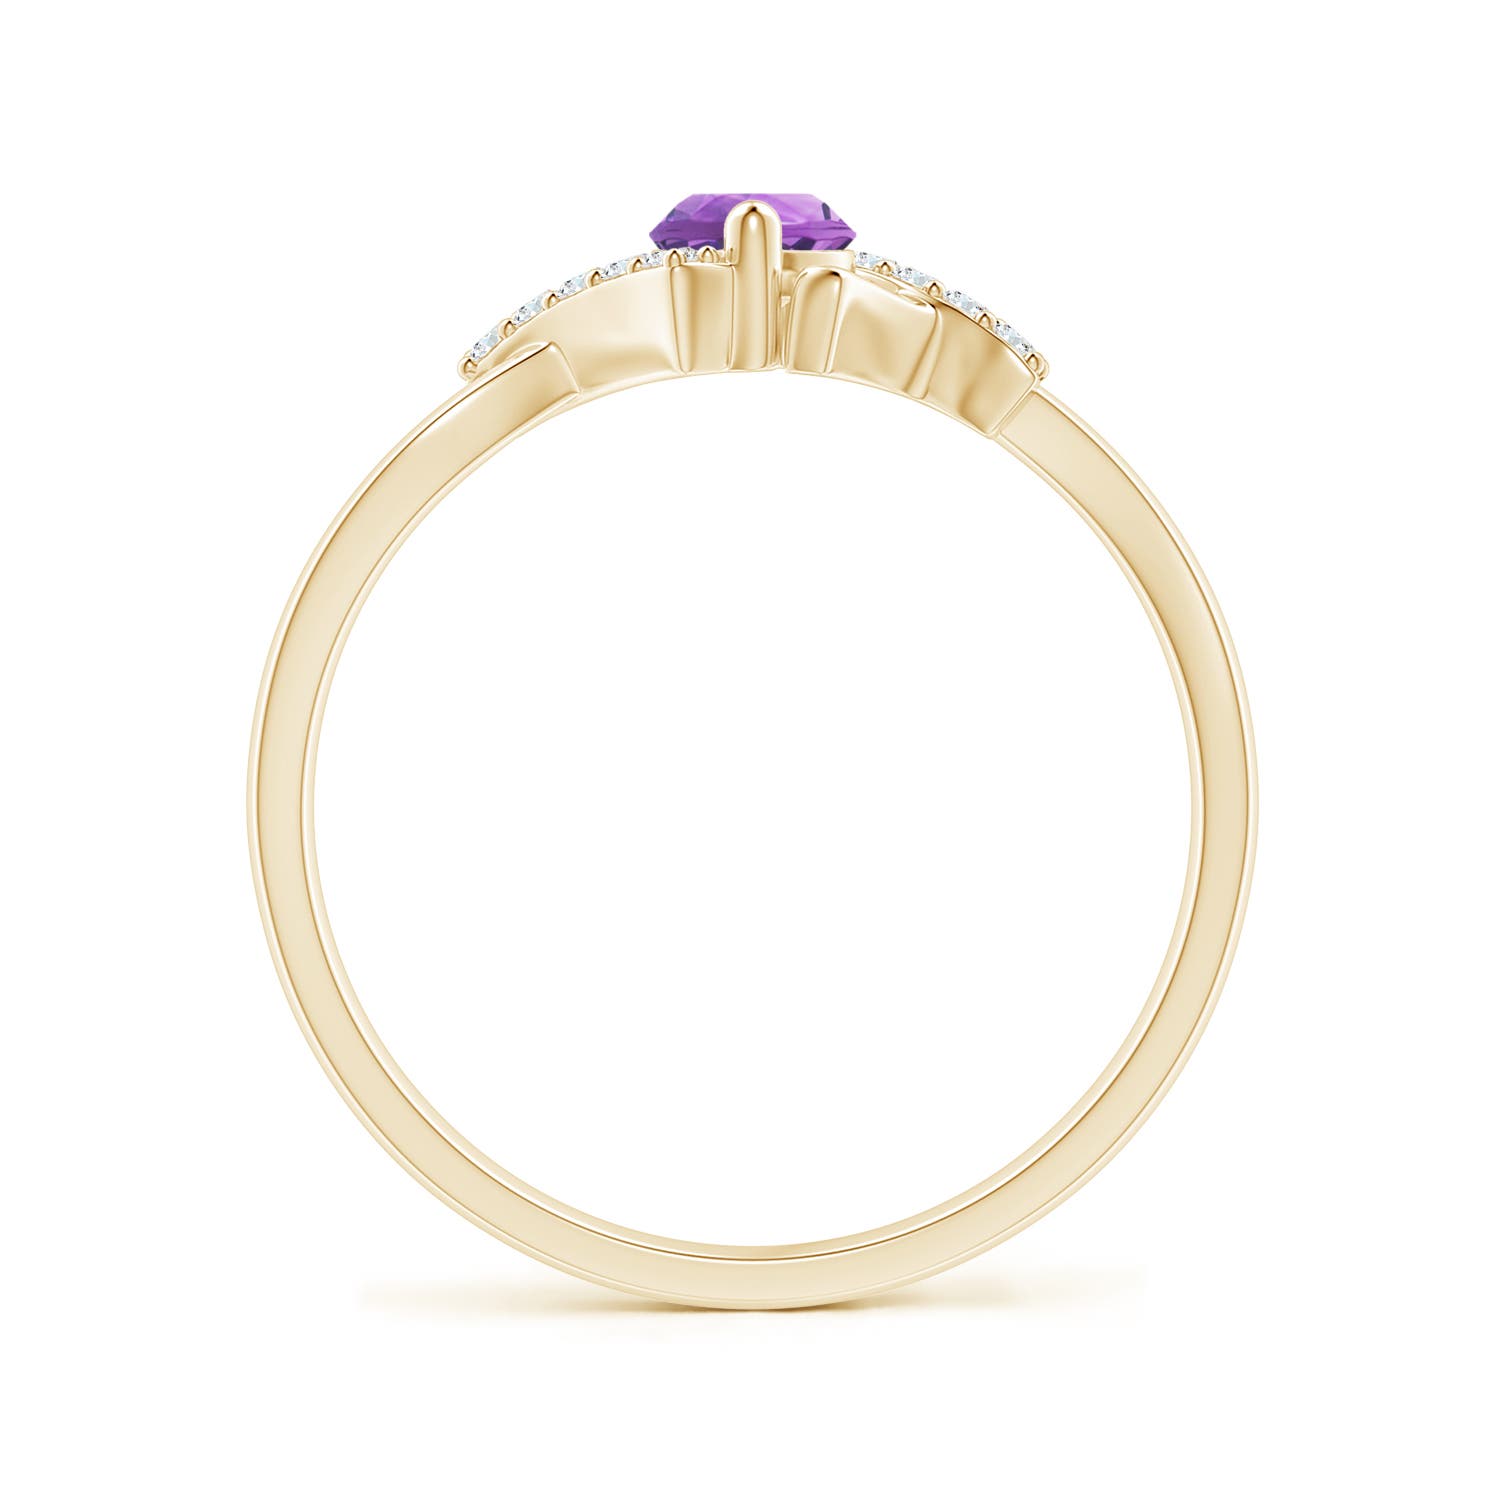 A - Amethyst / 0.31 CT / 14 KT Yellow Gold